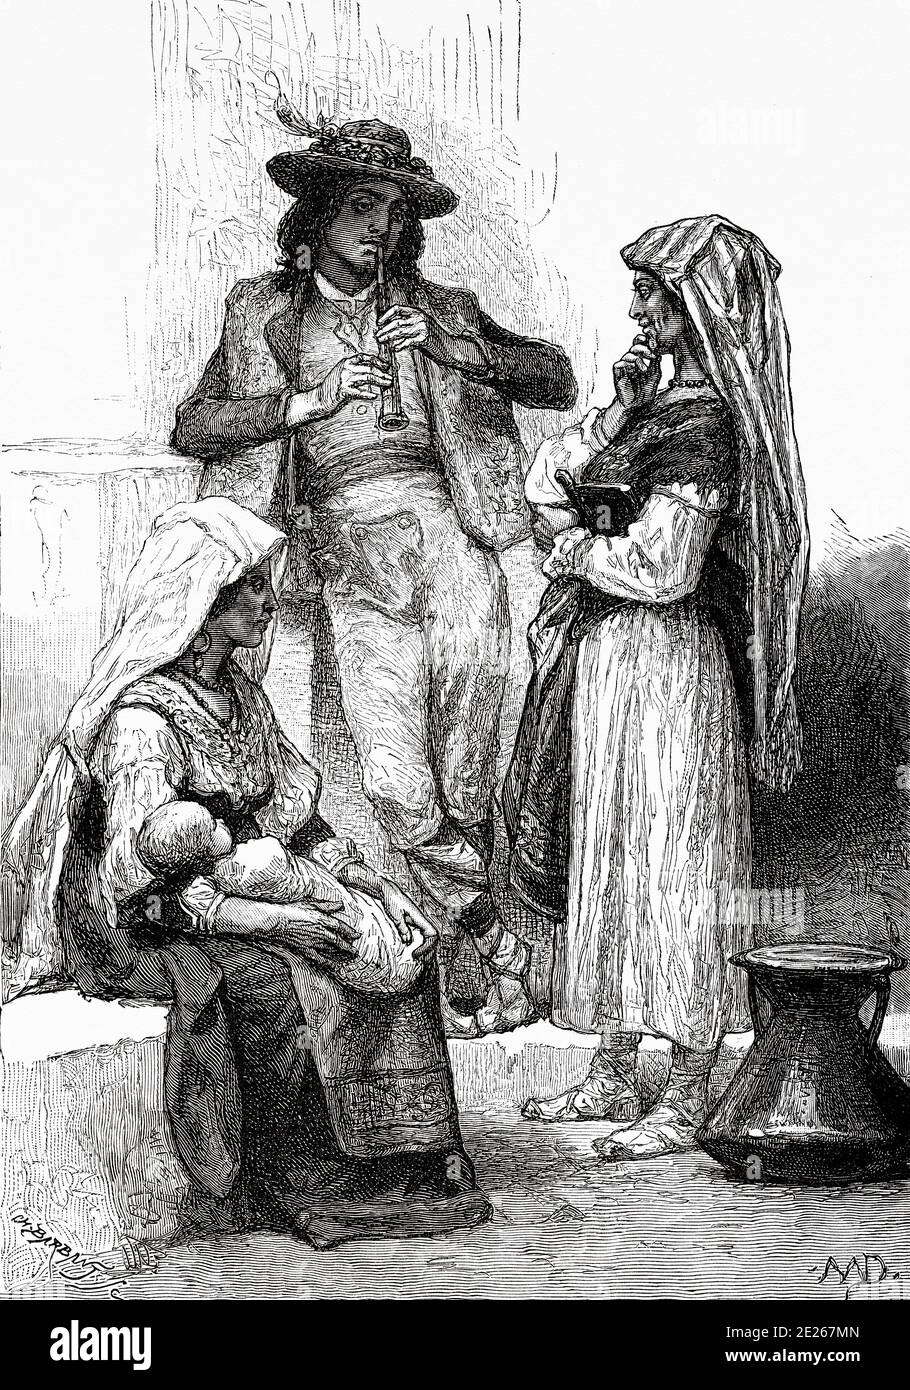 Characters in typical costumes of the mountain villages of Abruzzo. Italy Europe. Old 19th century engraved illustration image from the book New Universal Geography by Eliseo Reclus 1889 Stock Photo